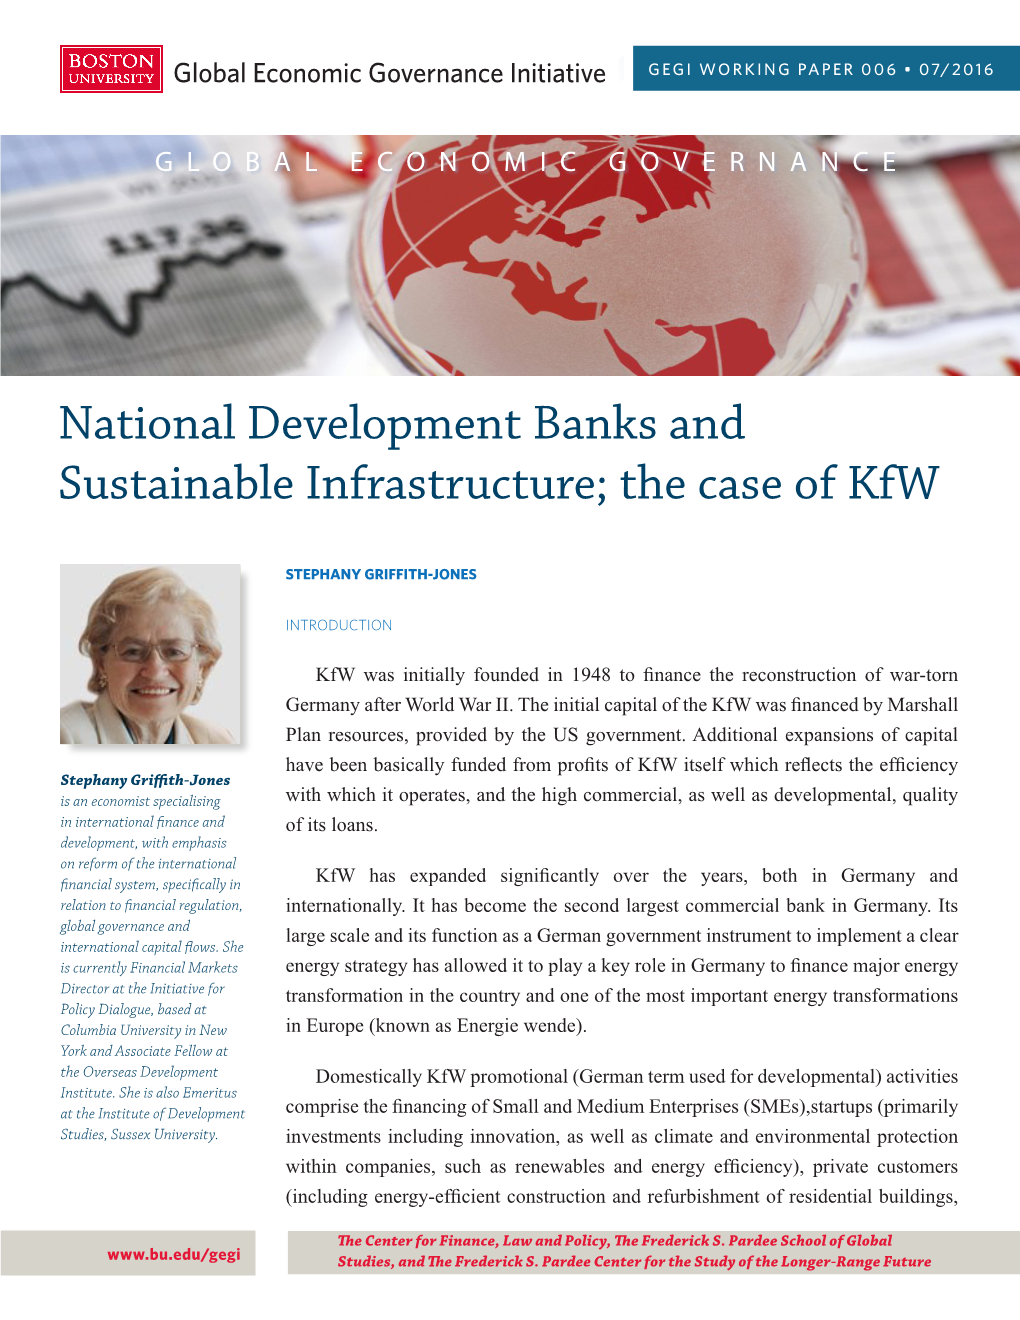 National Development Banks and Sustainable Infrastructure; the Case of Kfw